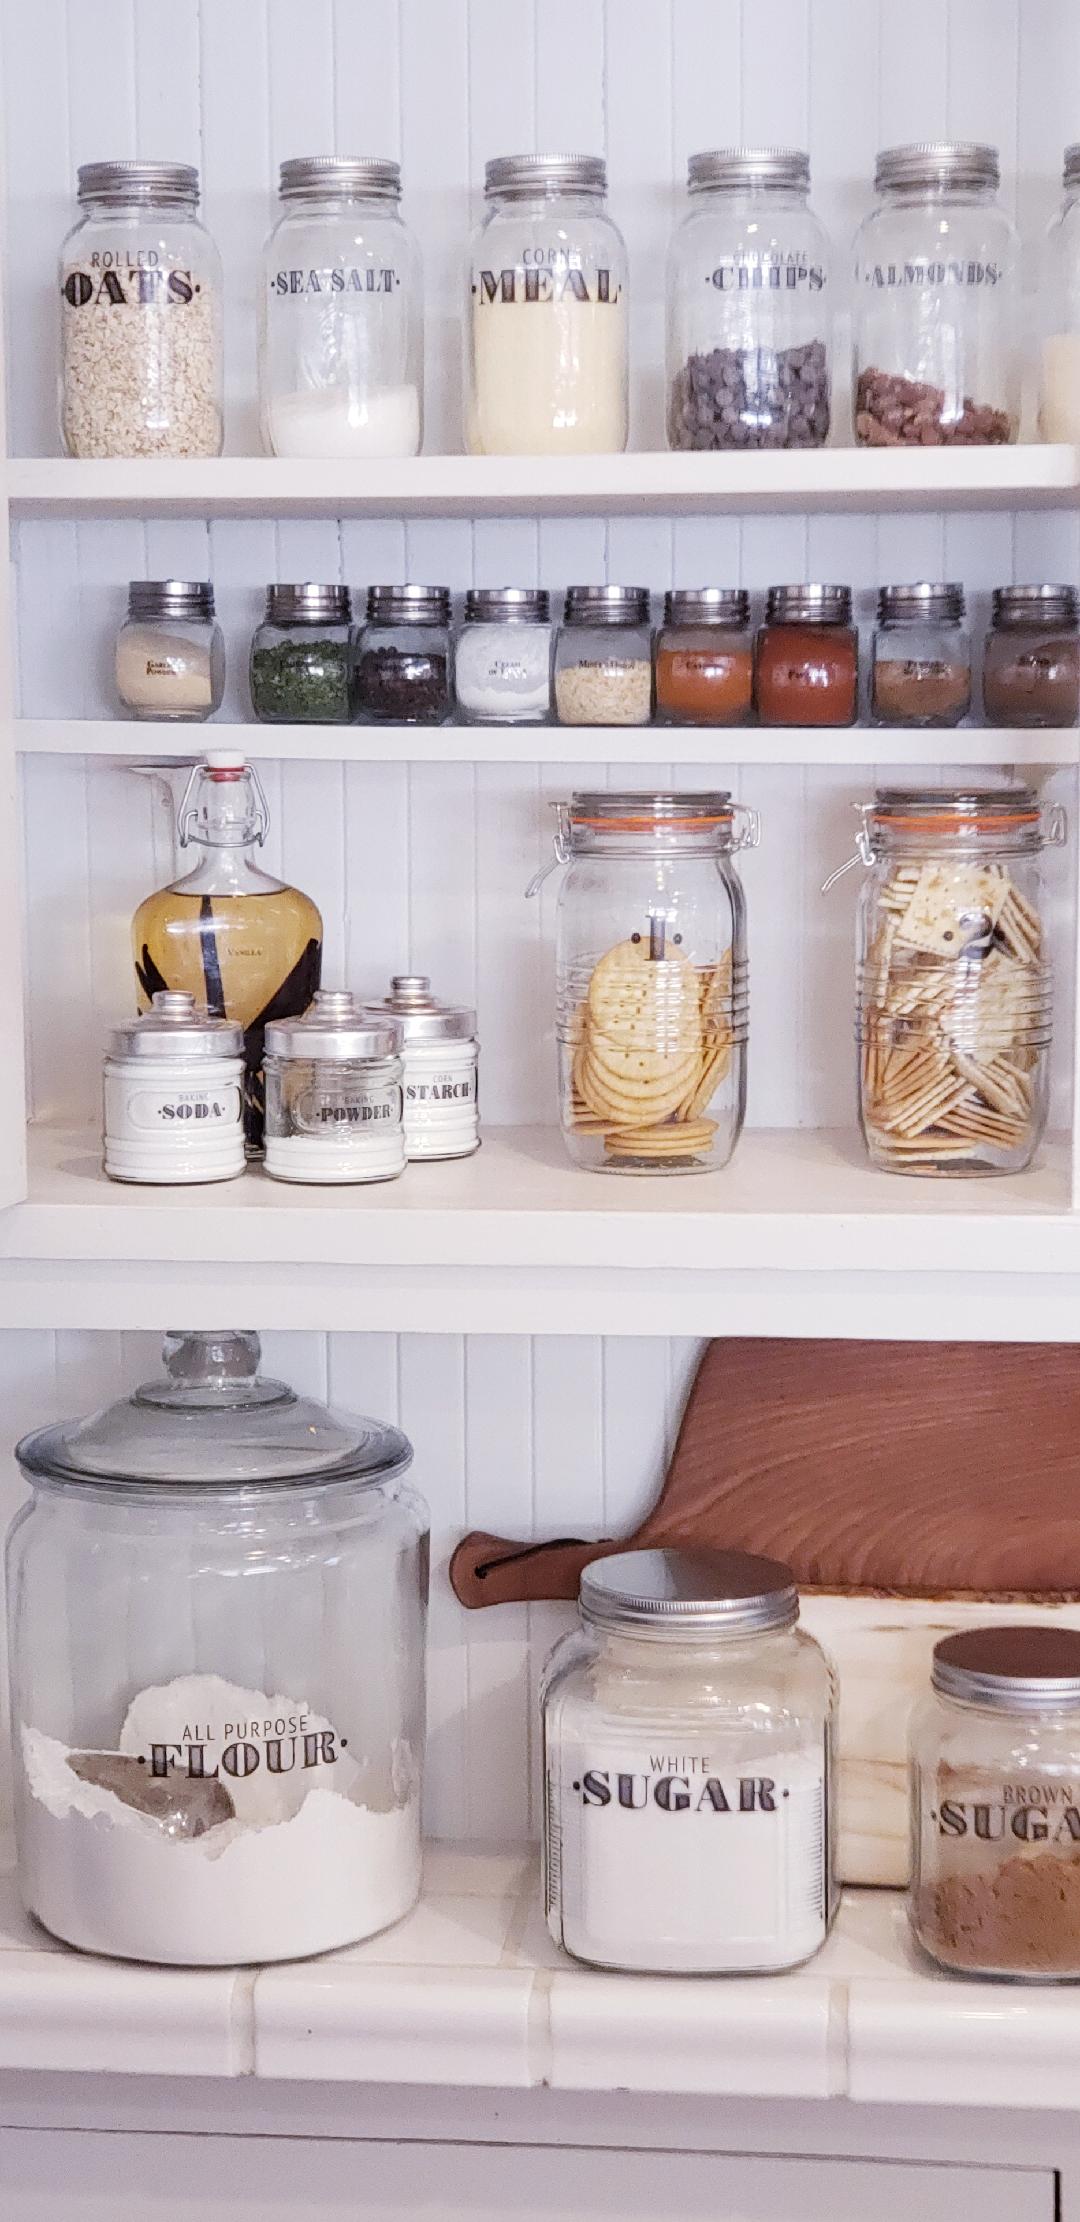 farmhouse pantry organized with clear jars and labels including baking items